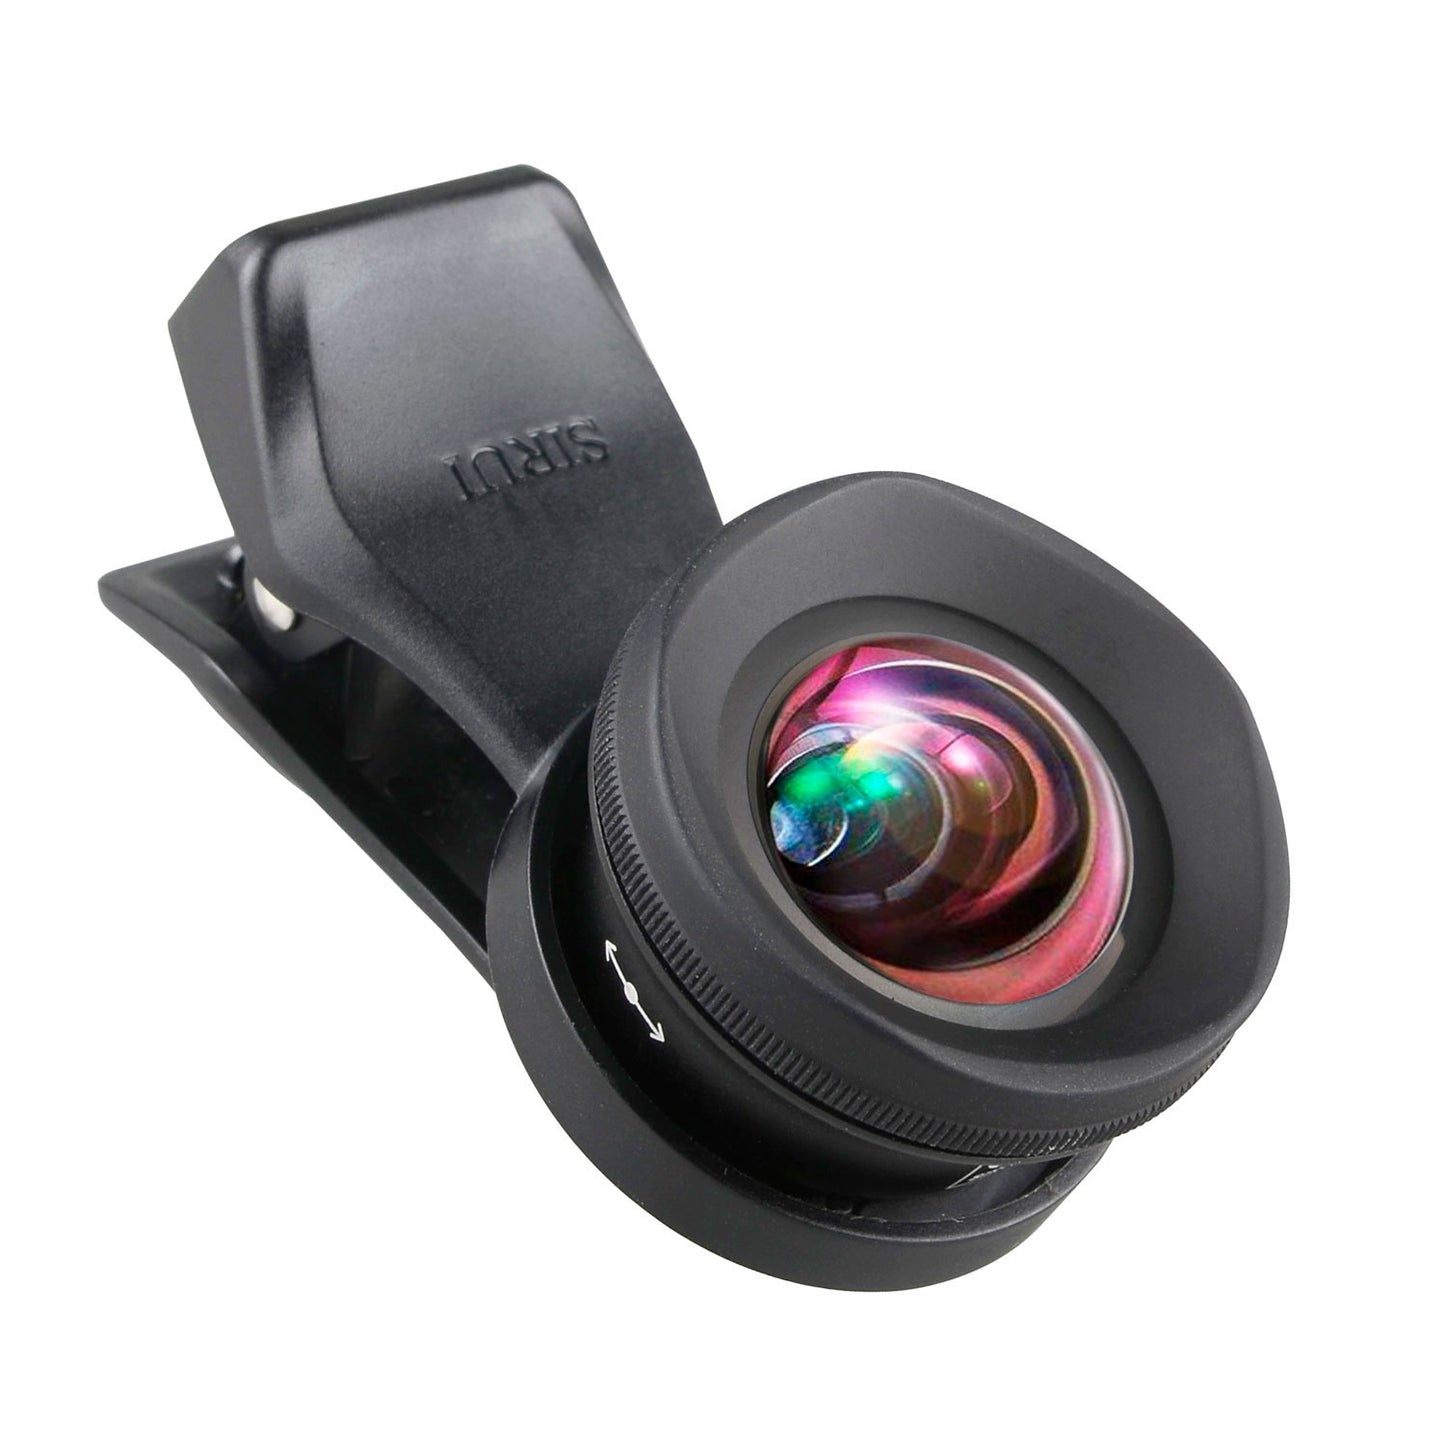 SIRUI 18-WA2+18-WA2-CPL Smartphone wide angle lens 18mm with polarizing filter and clip